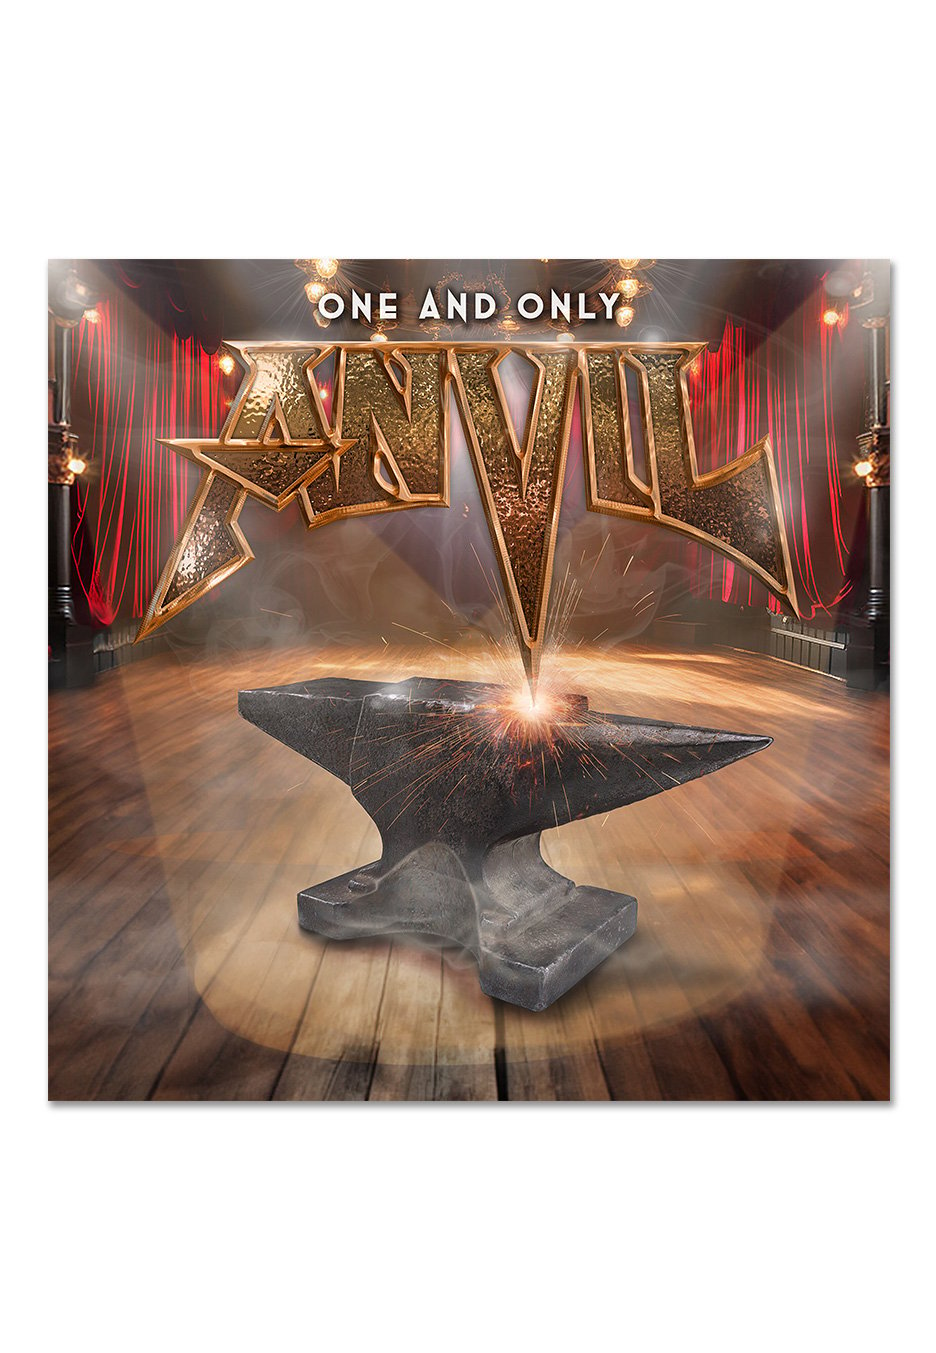 Anvil - One And Only - Vinyl